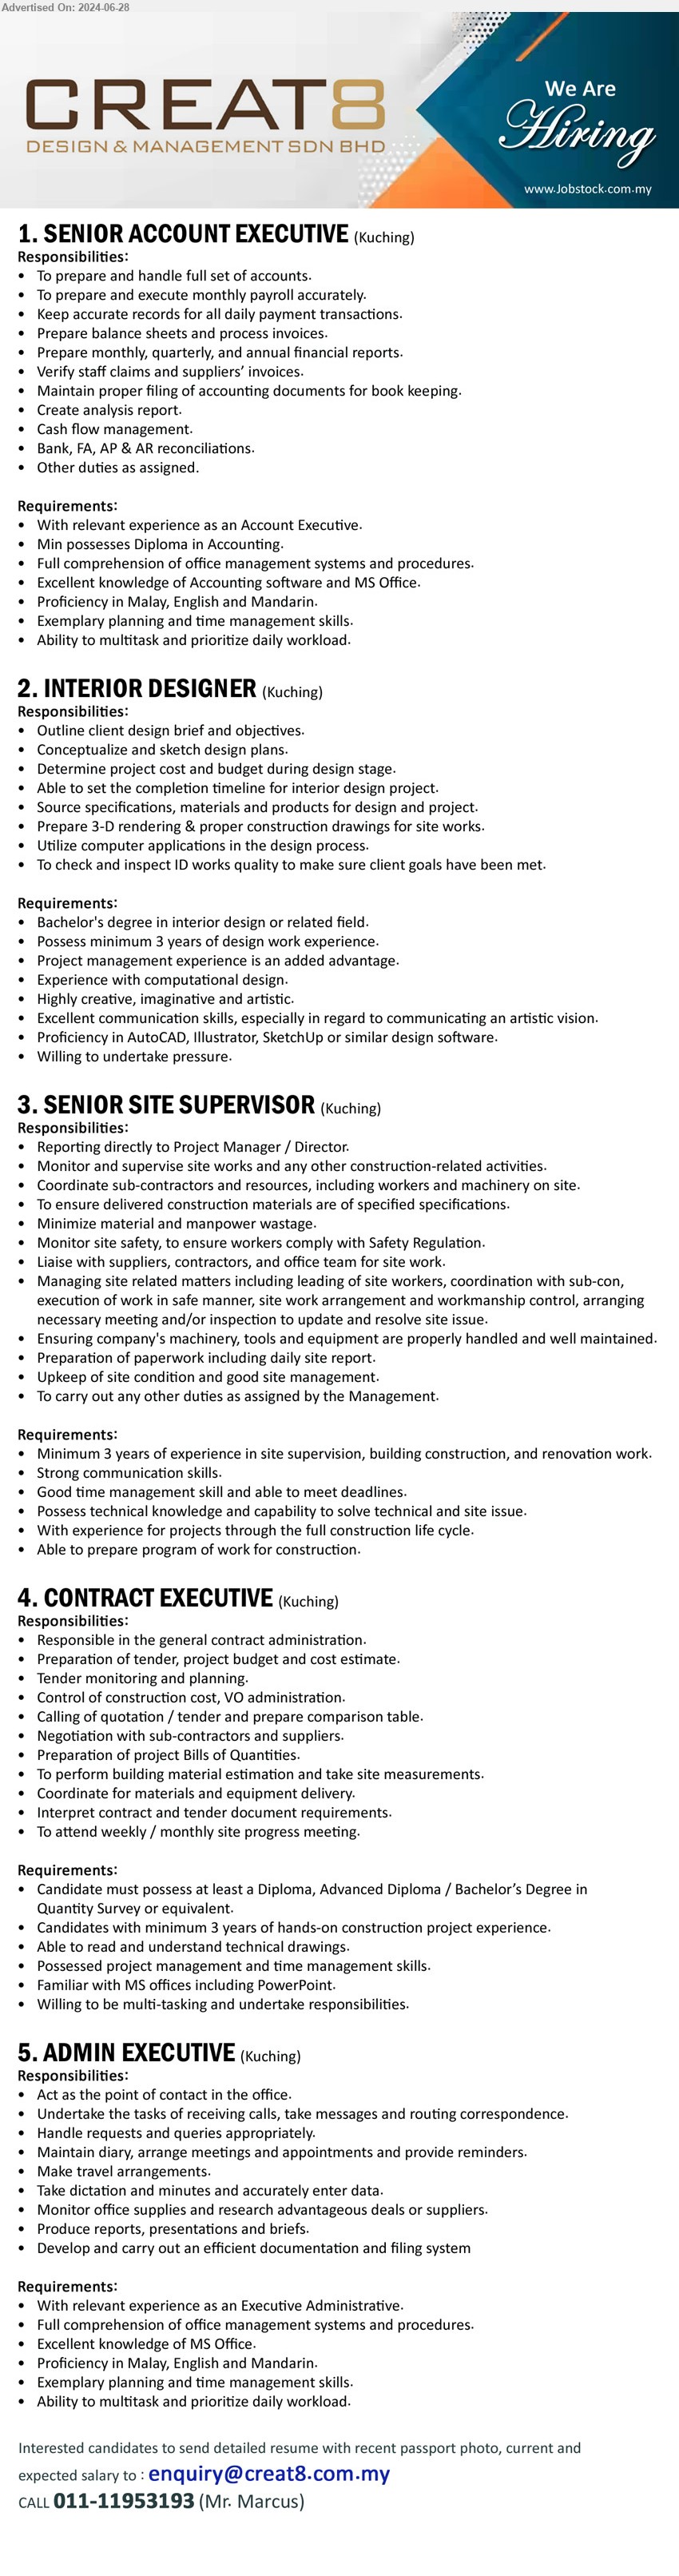 CREAT8 DESIGN & MANAGEMENT SDN BHD - 1. SENIOR ACCOUNT EXECUTIVE (Kuching), Diploma in Accounting, Excellent knowledge of Accounting software and MS Office.,...
2. INTERIOR DESIGNER (Kuching), Bachelor's Degree in Interior Design, 3 yrs. exp.,...
3. SENIOR SITE SUPERVISOR (Kuching), Minimum 3 years of experience in site supervision, building construction, and renovation work.,...
4. CONTRACT EXECUTIVE (Kuching), Diploma, Advanced Diploma / Bachelor’s Degree in Quantity Survey,...
5. ADMIN EXECUTIVE (Kuching), Excellent knowledge of MS Office, Proficiency in Malay, English and Mandarin. ,...
CALL 011-11953193 (Mr. Marcus) / Email resume to ...